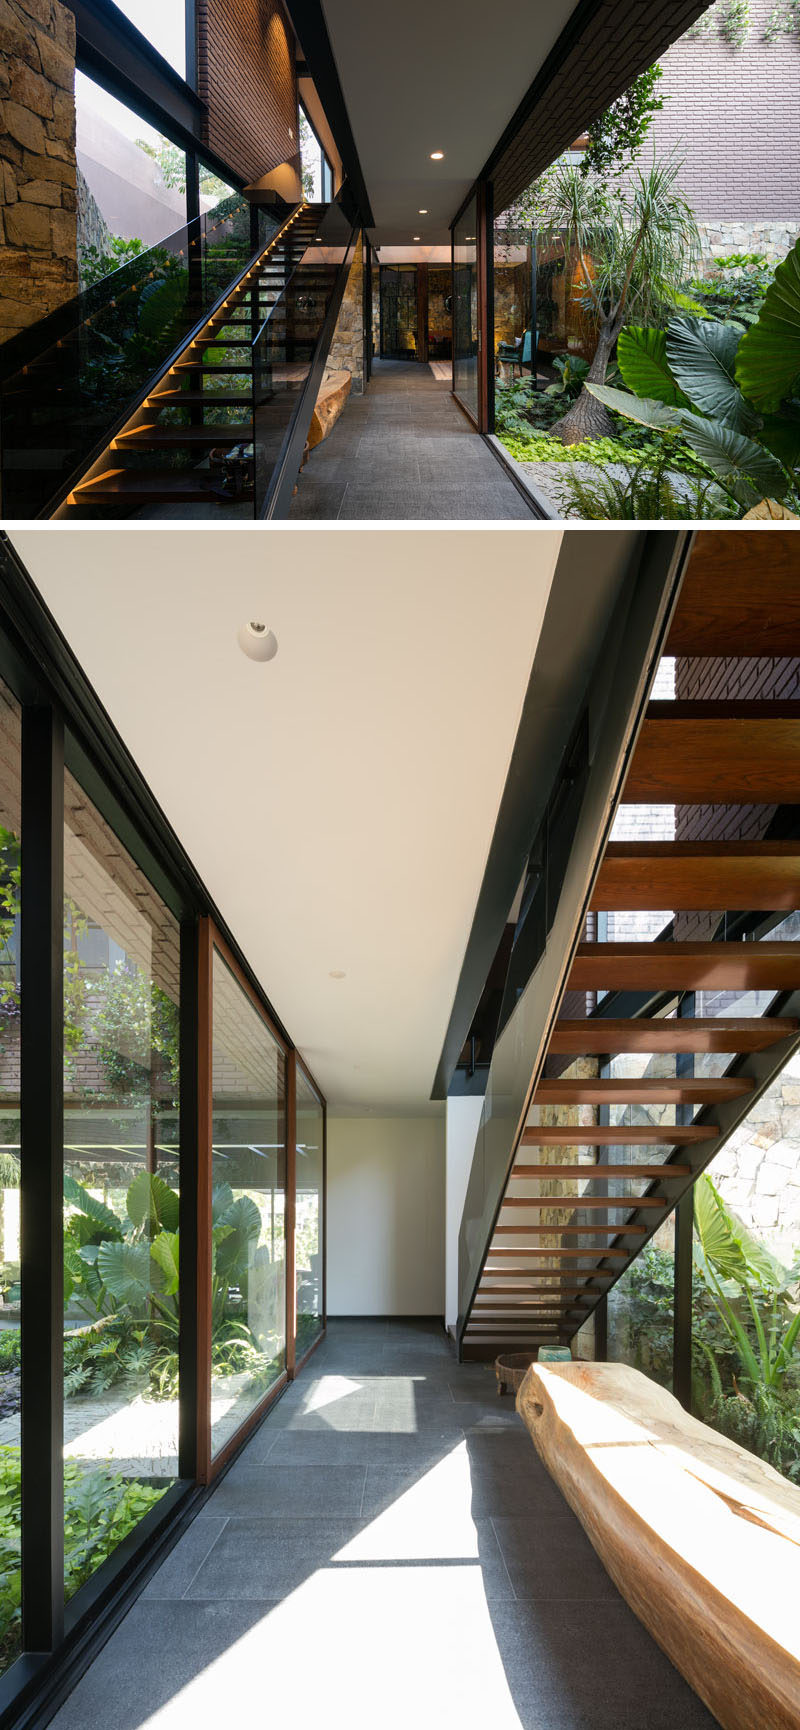 Wood, steel and glass stairs lead to the upper floor of this modern Mexican house.